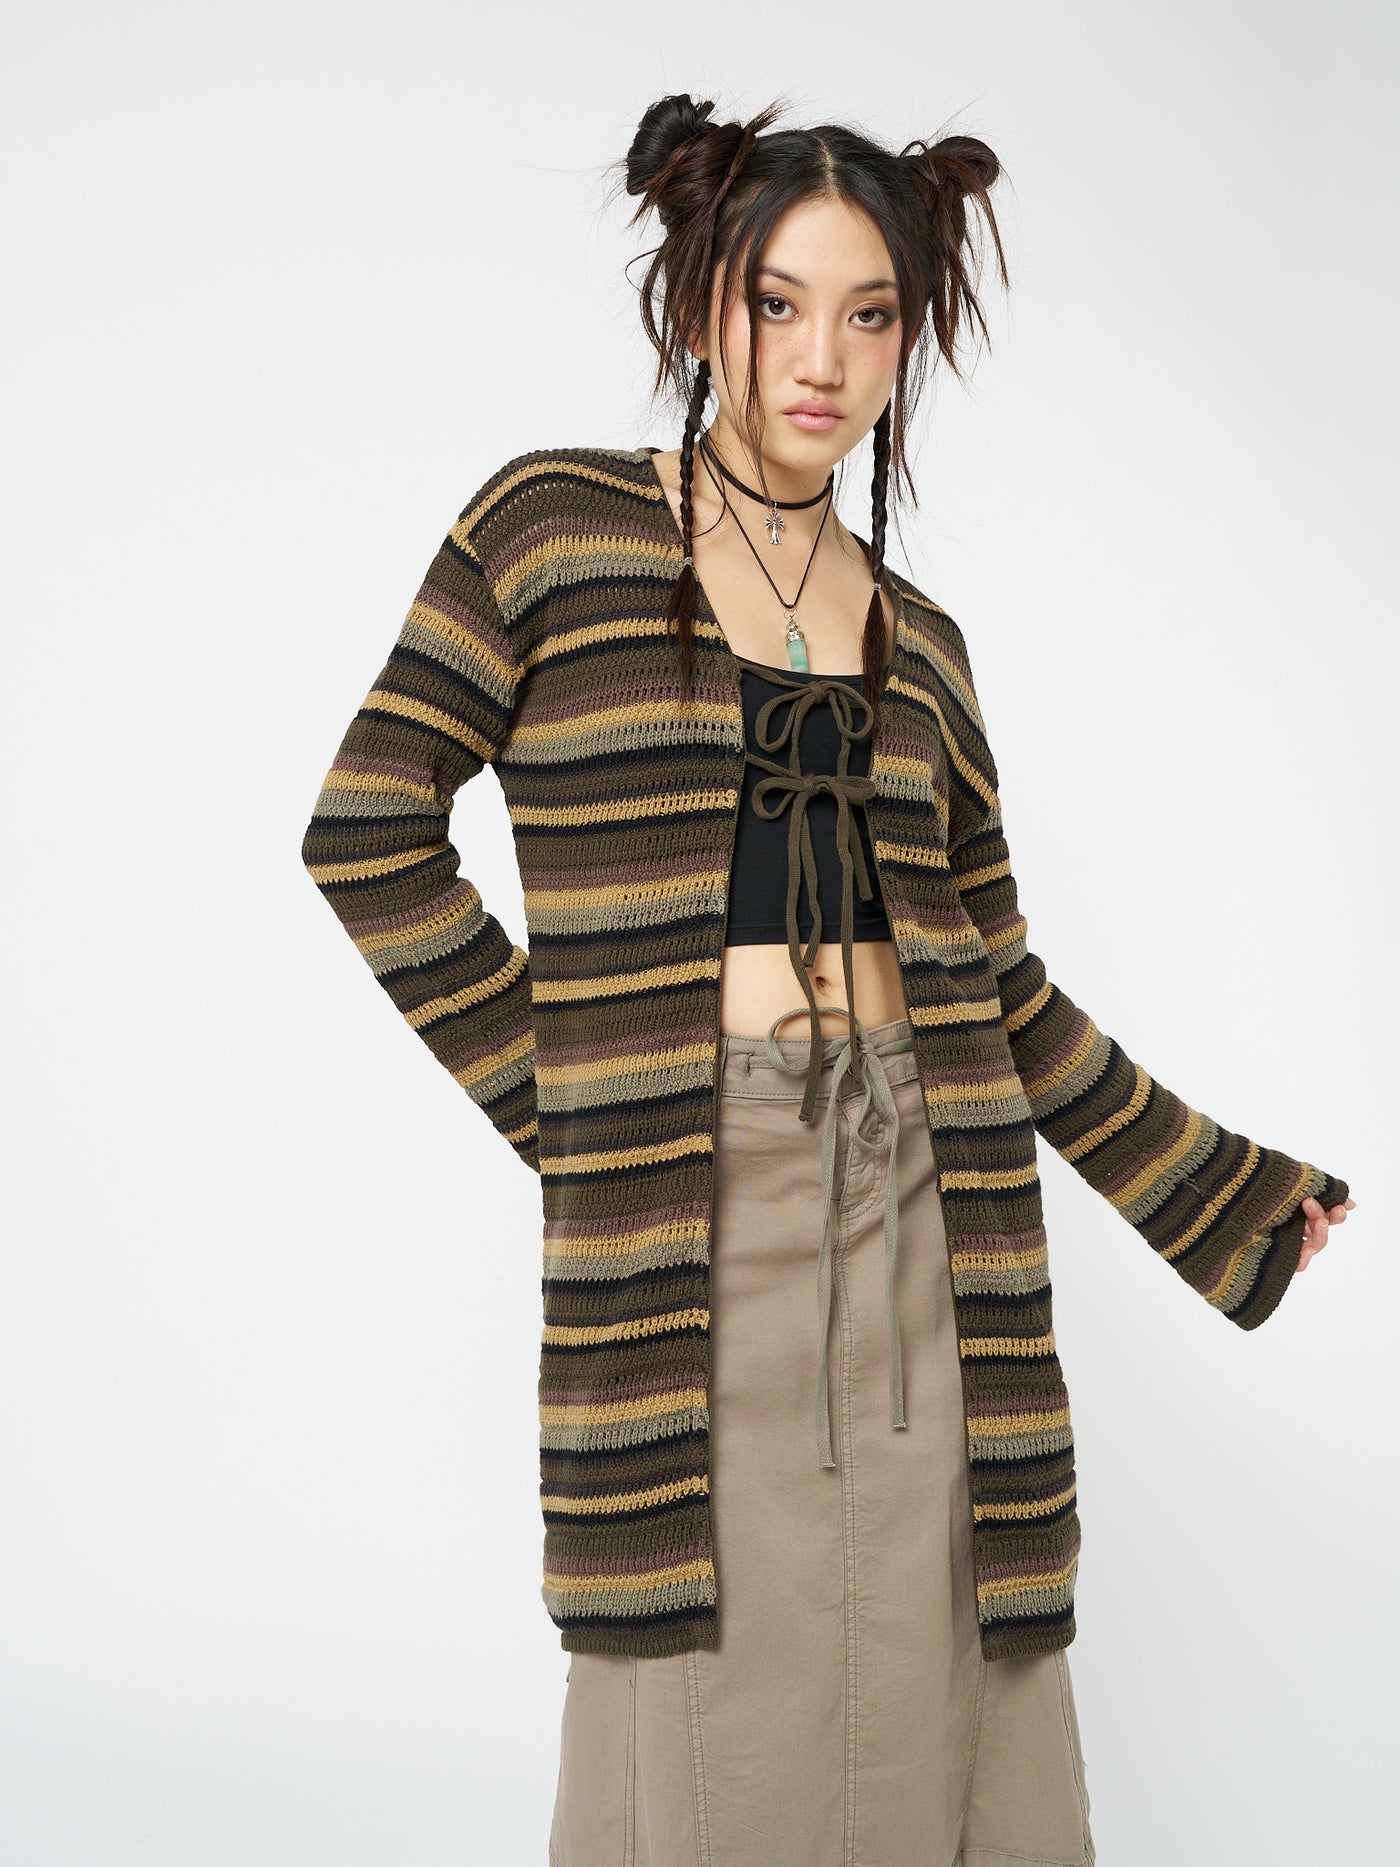 Embrace nature-inspired style with this forest striped knit cardigan featuring a trendy tie front detail.